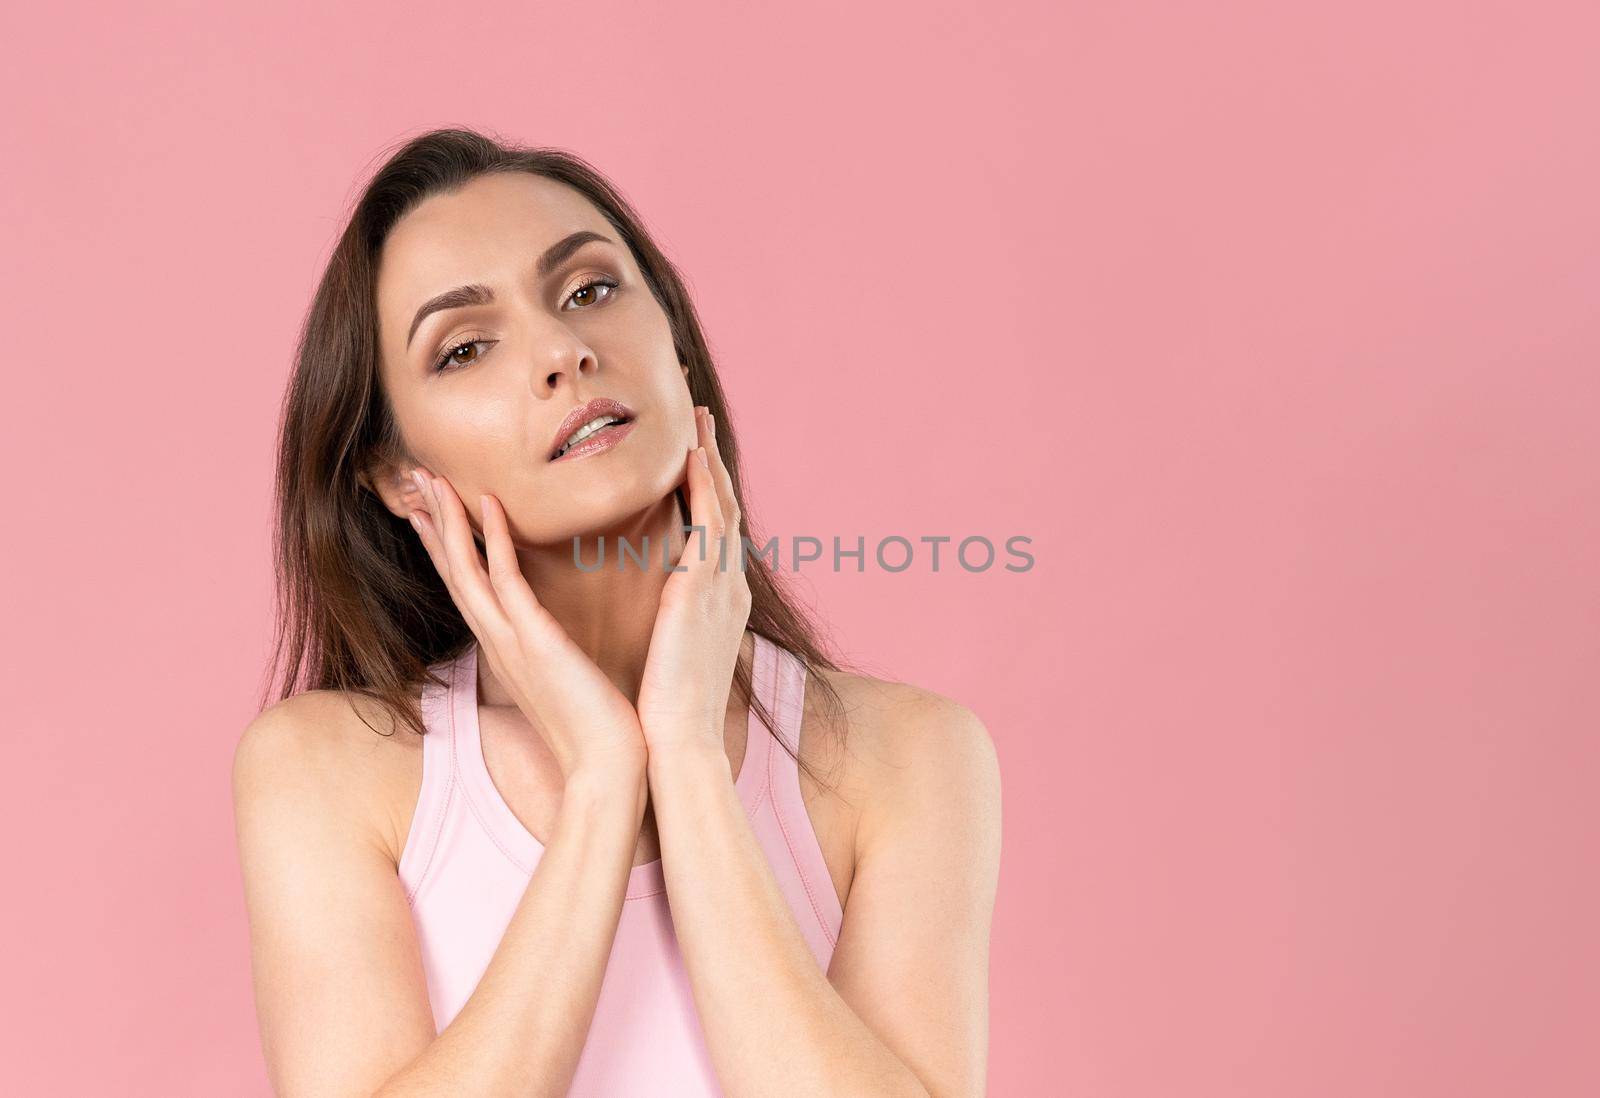 Moisturising her face beautiful woman with no makeup standing with hands on her chicks, massaging it gently attractive brunette girl on pink background. Skin care concept.